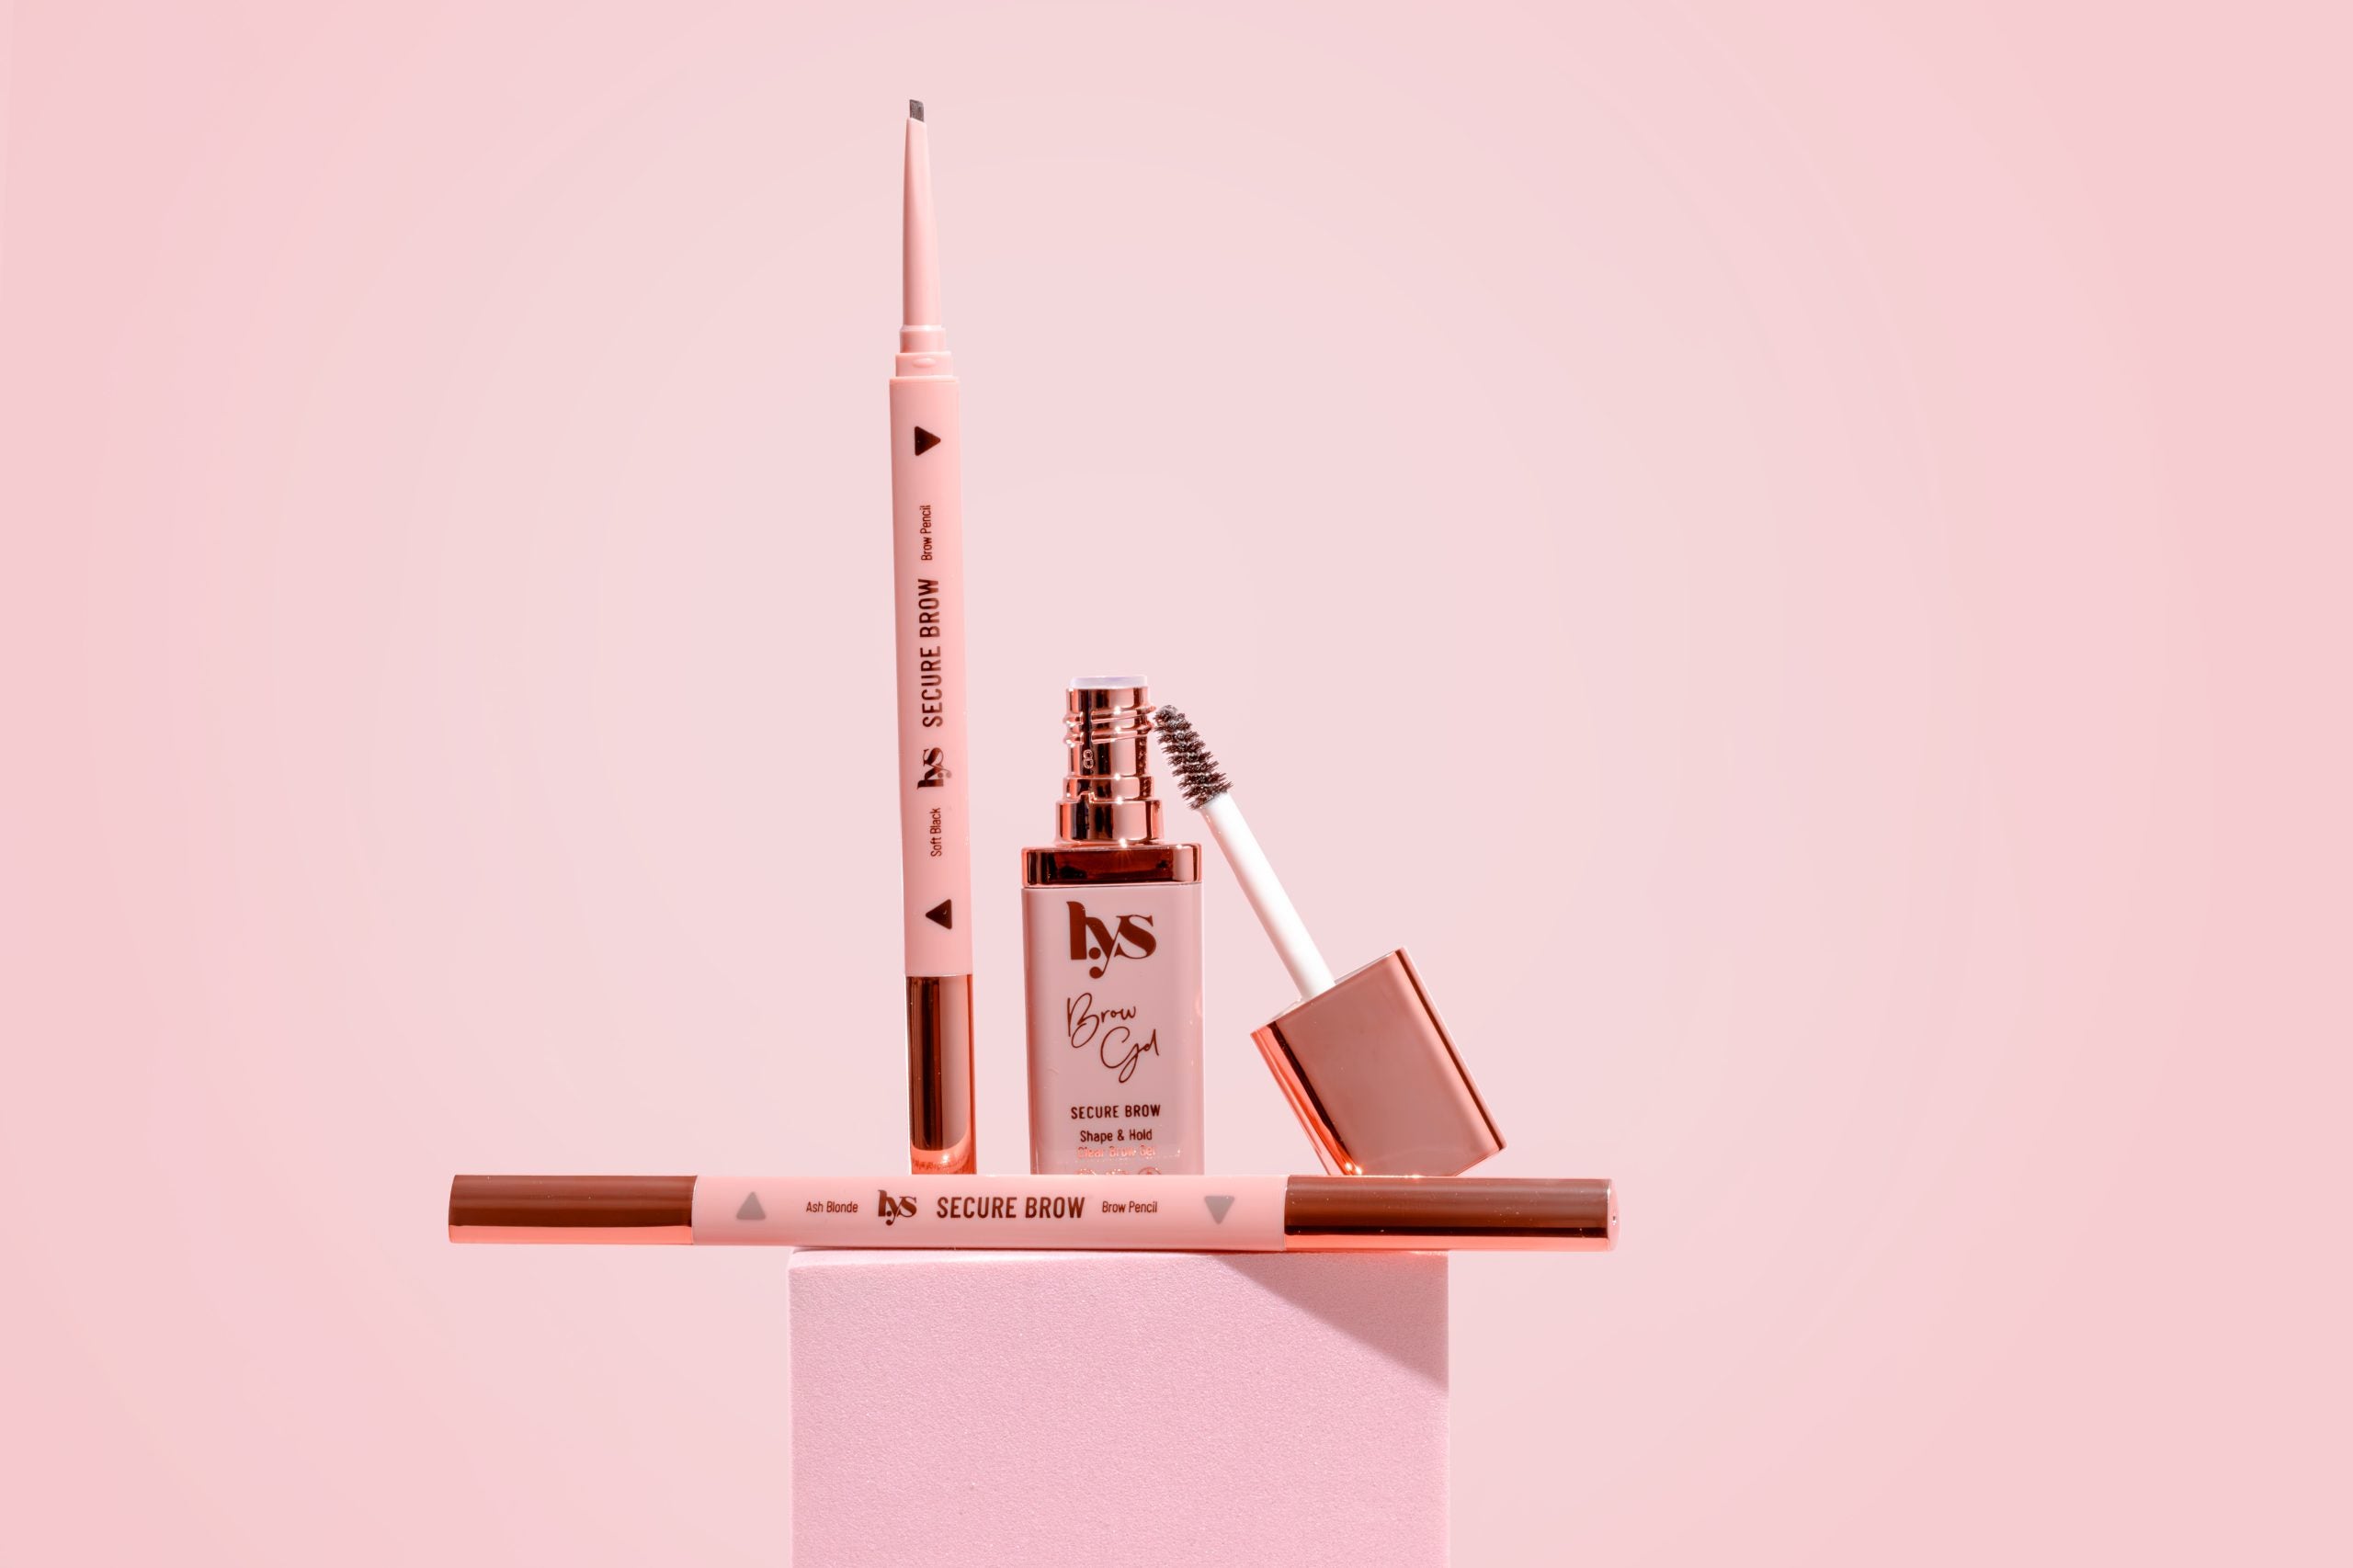 LYS Beauty Is Giving Back During Breast Cancer Awareness Month With Their New Brow Collection